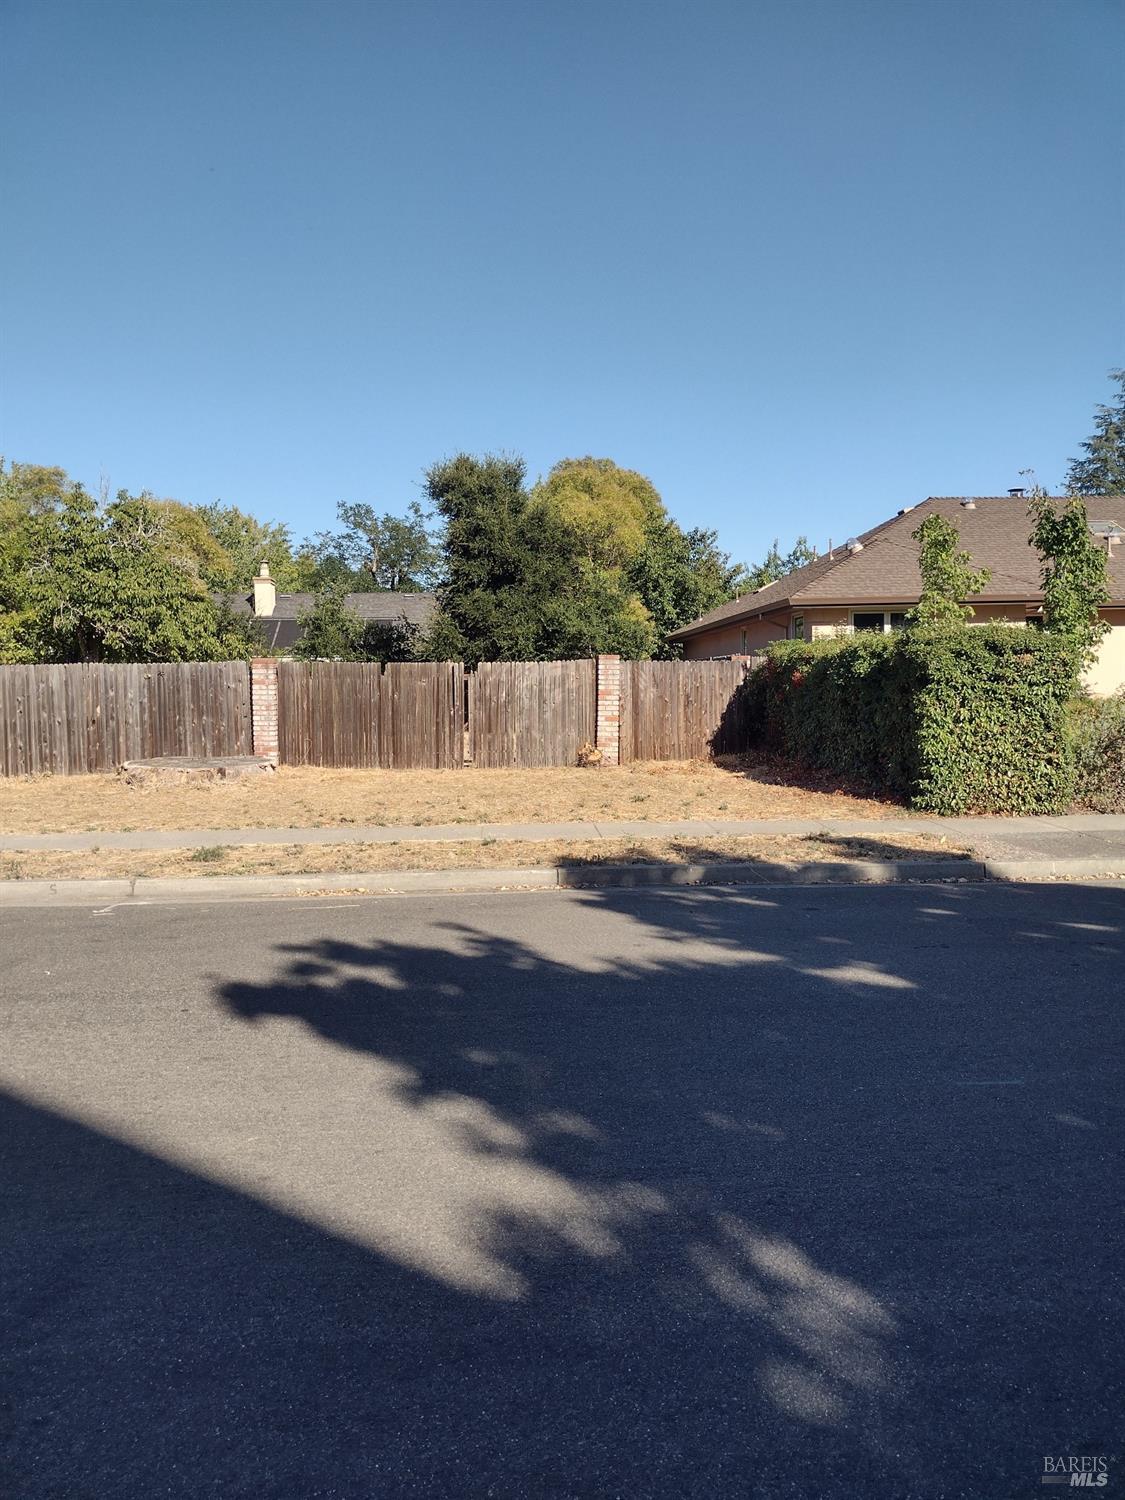 This is a fantastic opportunity to acquire land in Sonoma! This incredible opportunity to own a beautiful vacant lot in the City limits of Sonoma,   flat land, developable, buildable...and on the East side of Sonoma situated just blocks from Sonoma's historic downtown plaza. This is One of Two vacant parcels available in neighborhood of custom homes, public utilities available.  Don't miss this opportunity..